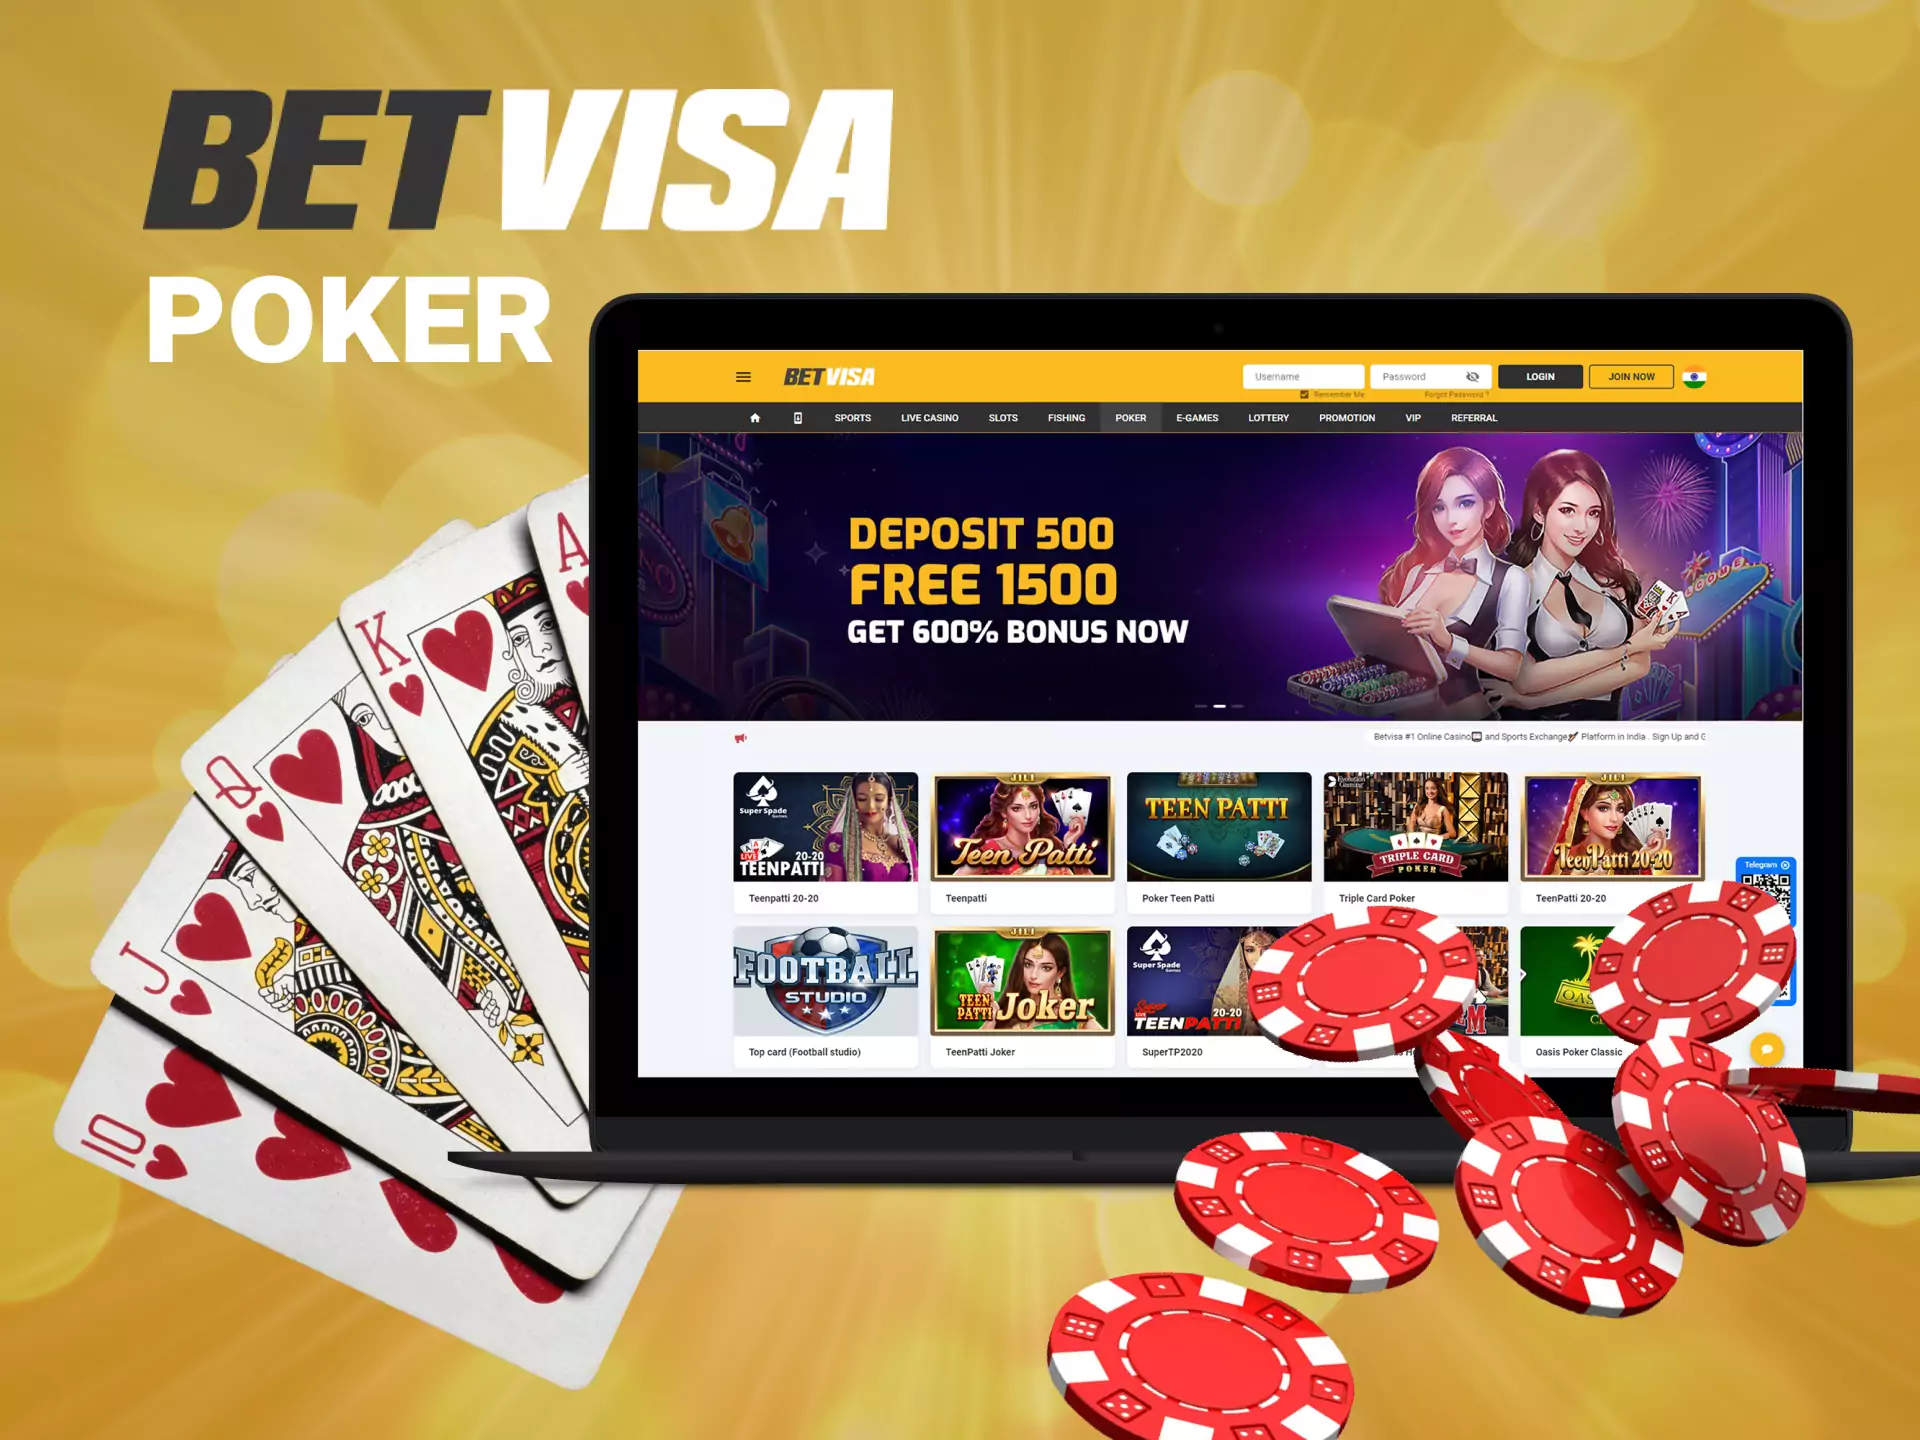 There are many poker rooms in the Betvisa Casino.